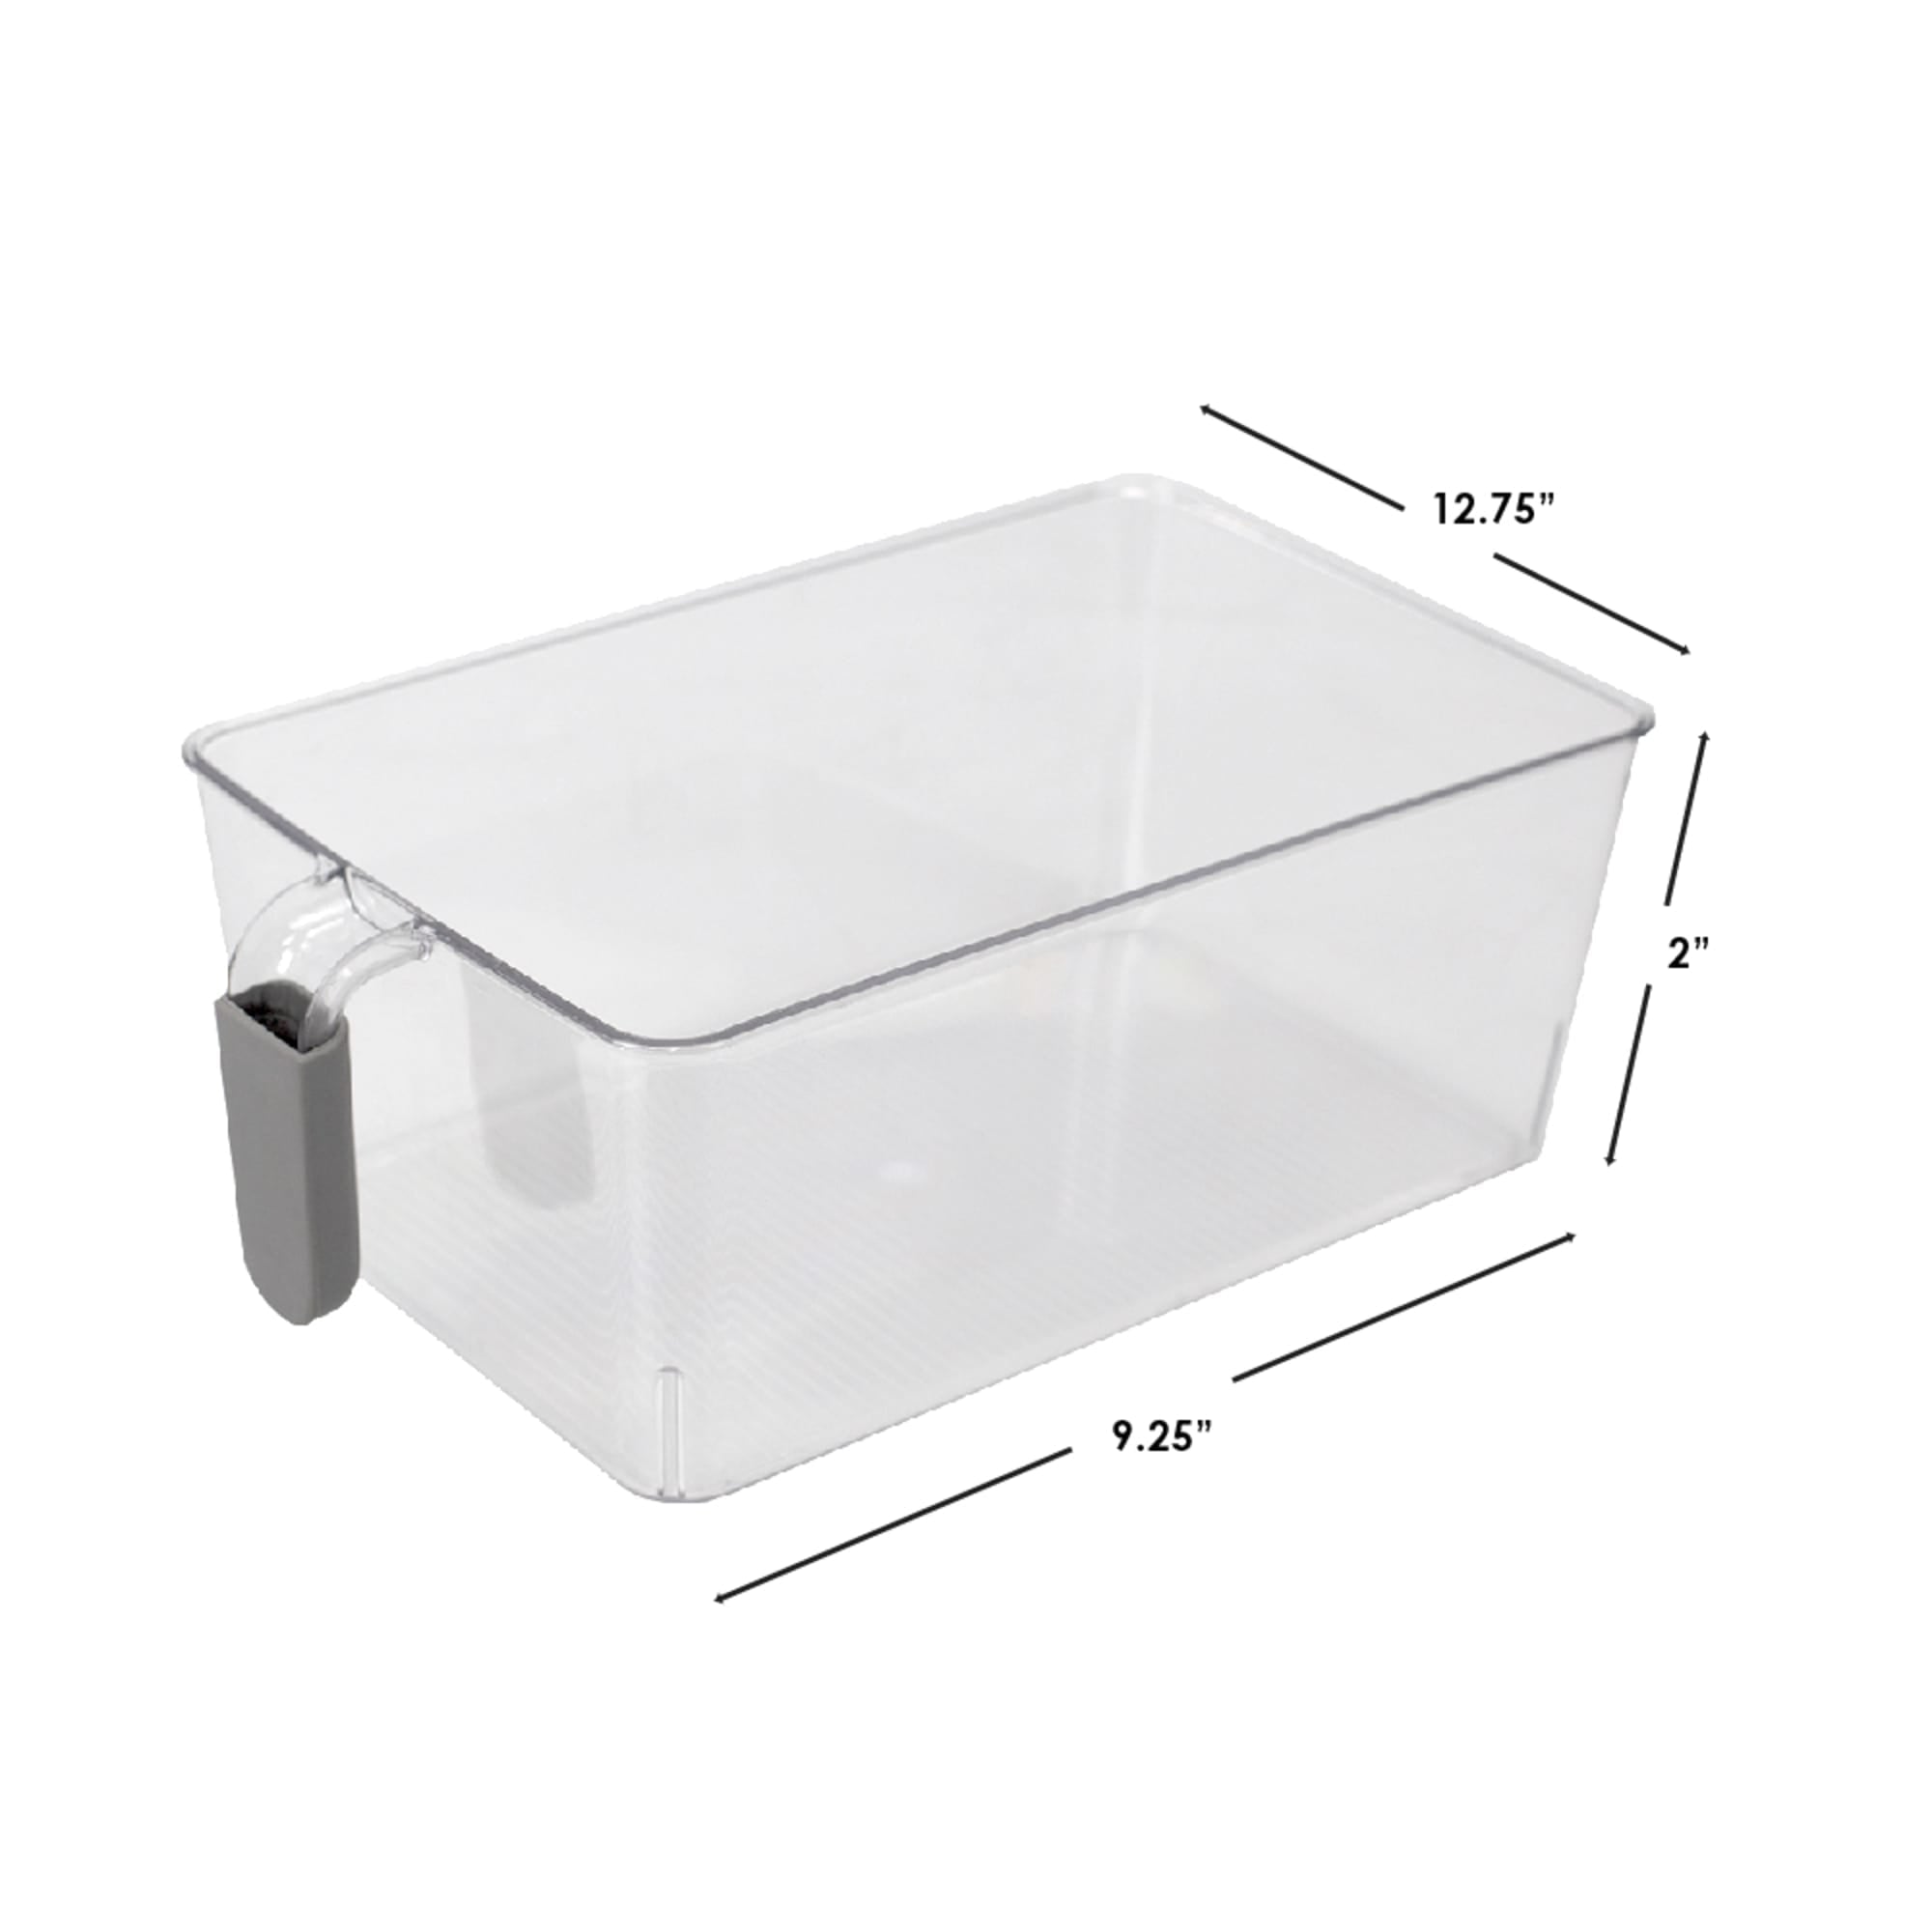 Large Plastic Storage Containers at